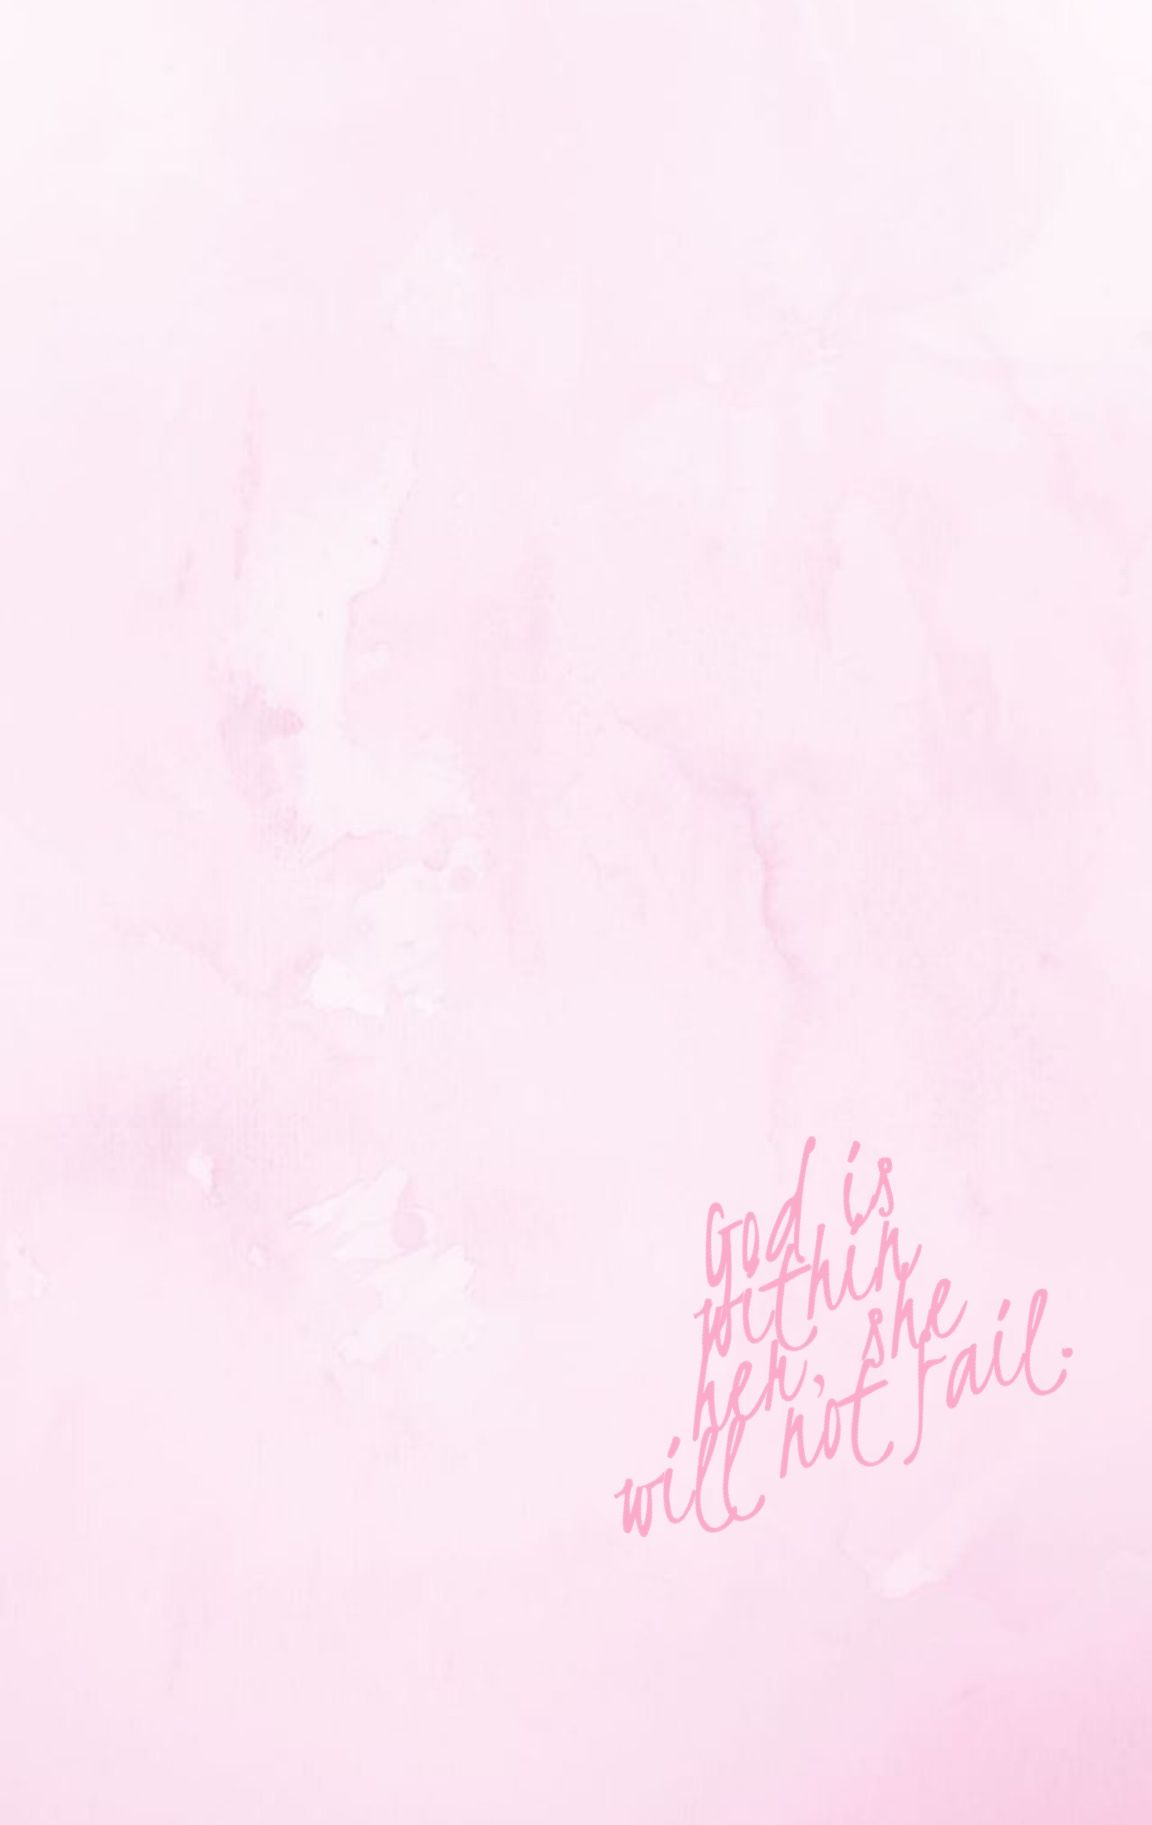 God is within her, she will not fail” wallpaper. credits: Kate